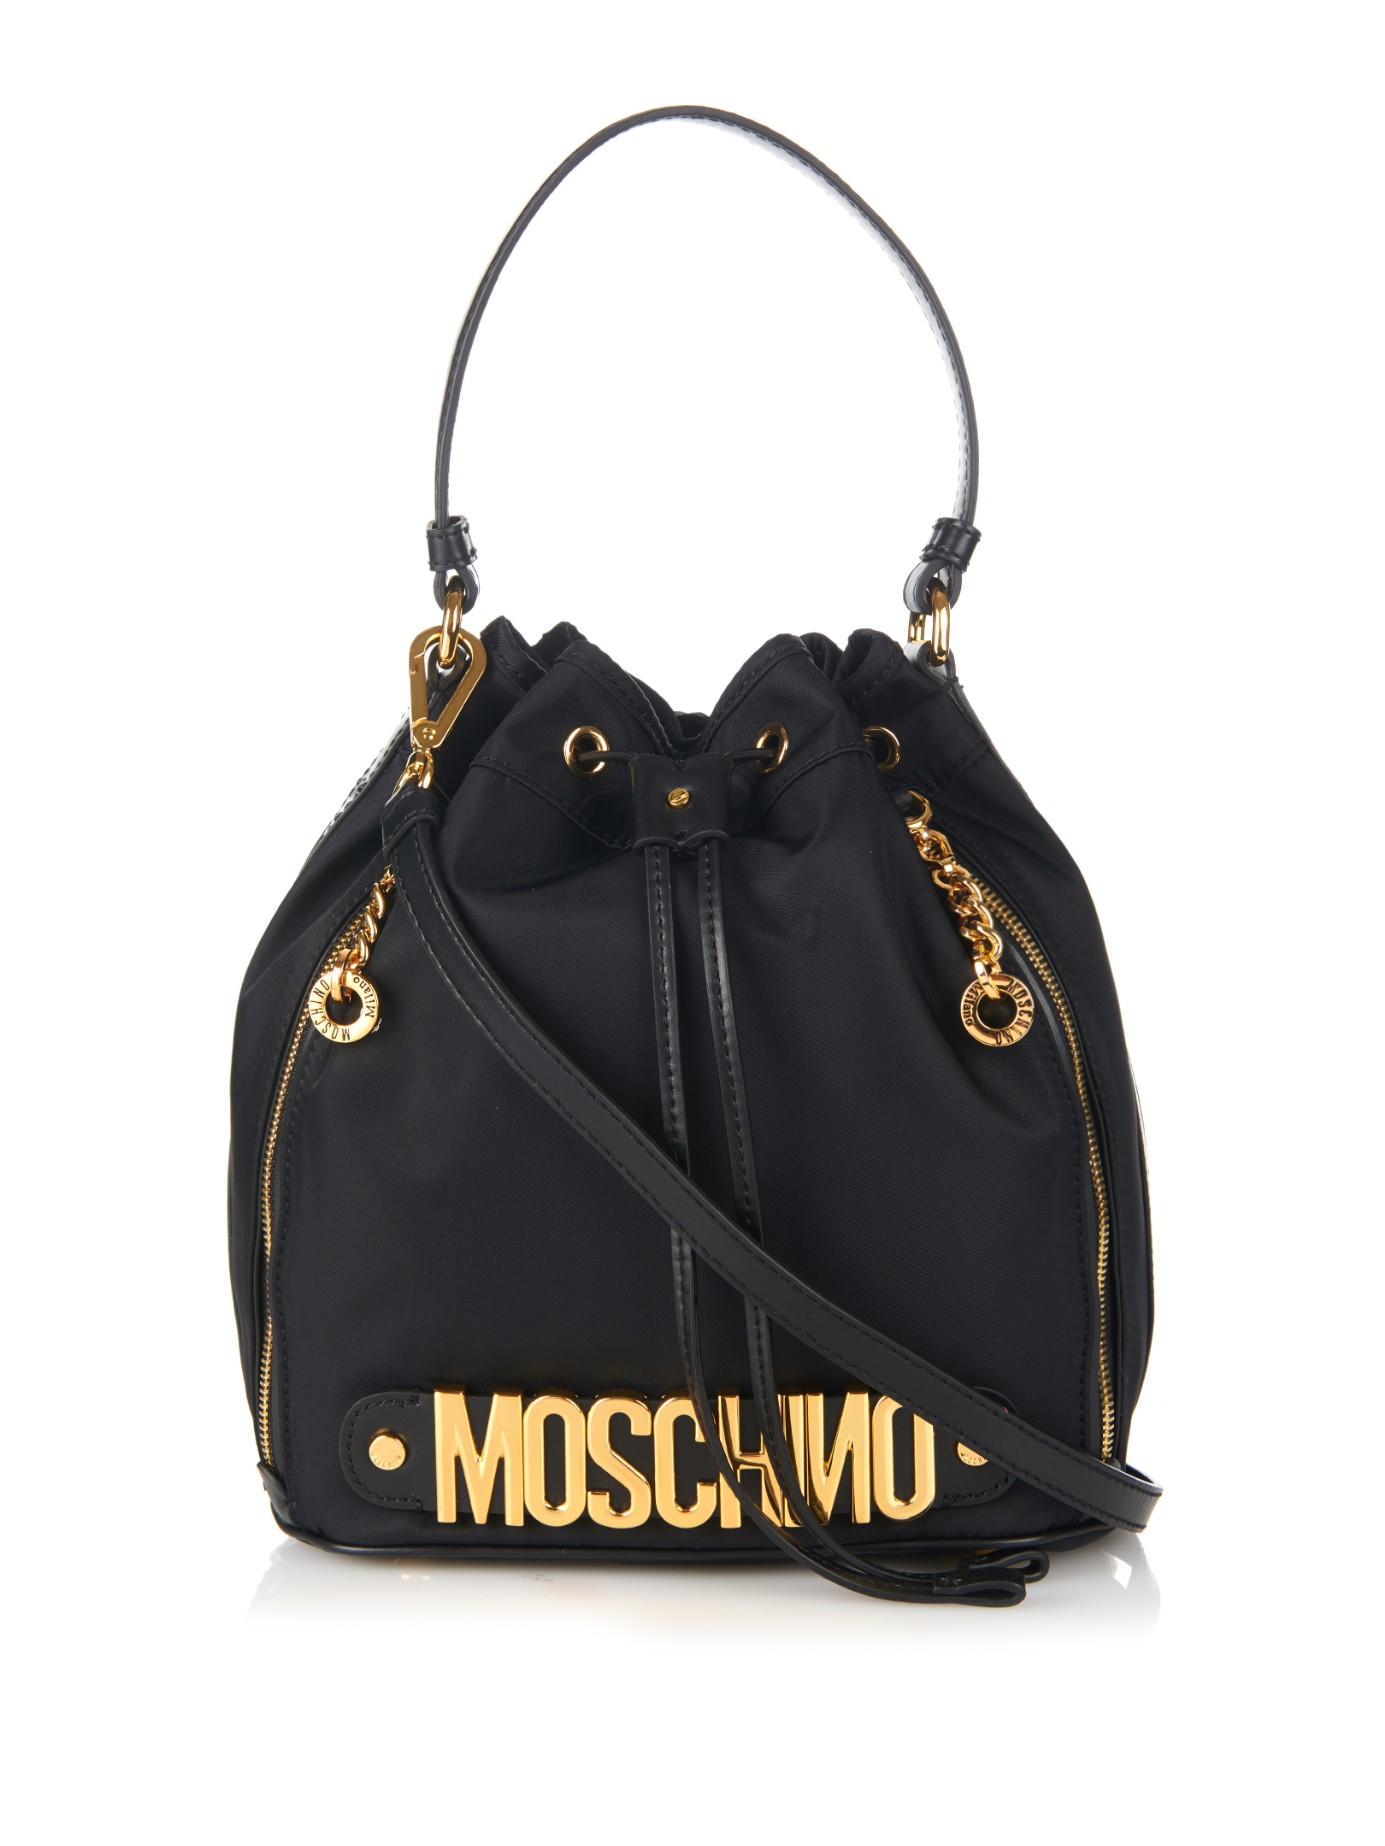 Moschino Lettering Leather And Nylon Bucket Bag in Black - Lyst